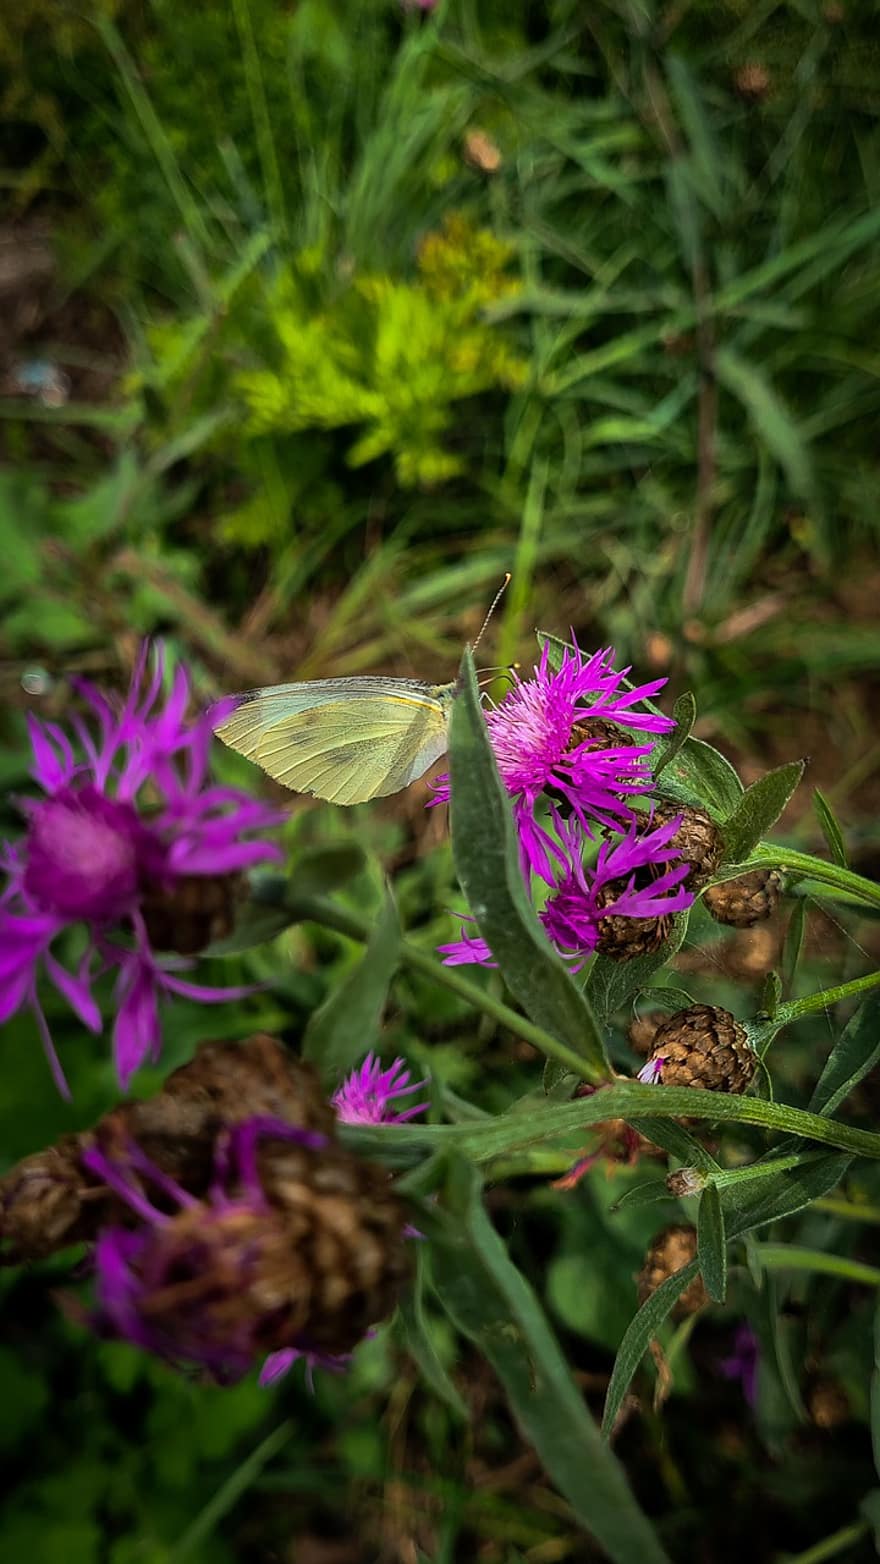 Cabbage White Butterfly, Butterfly, Flowers, Knapweeds, Leaves, Plants, Nature, Summer